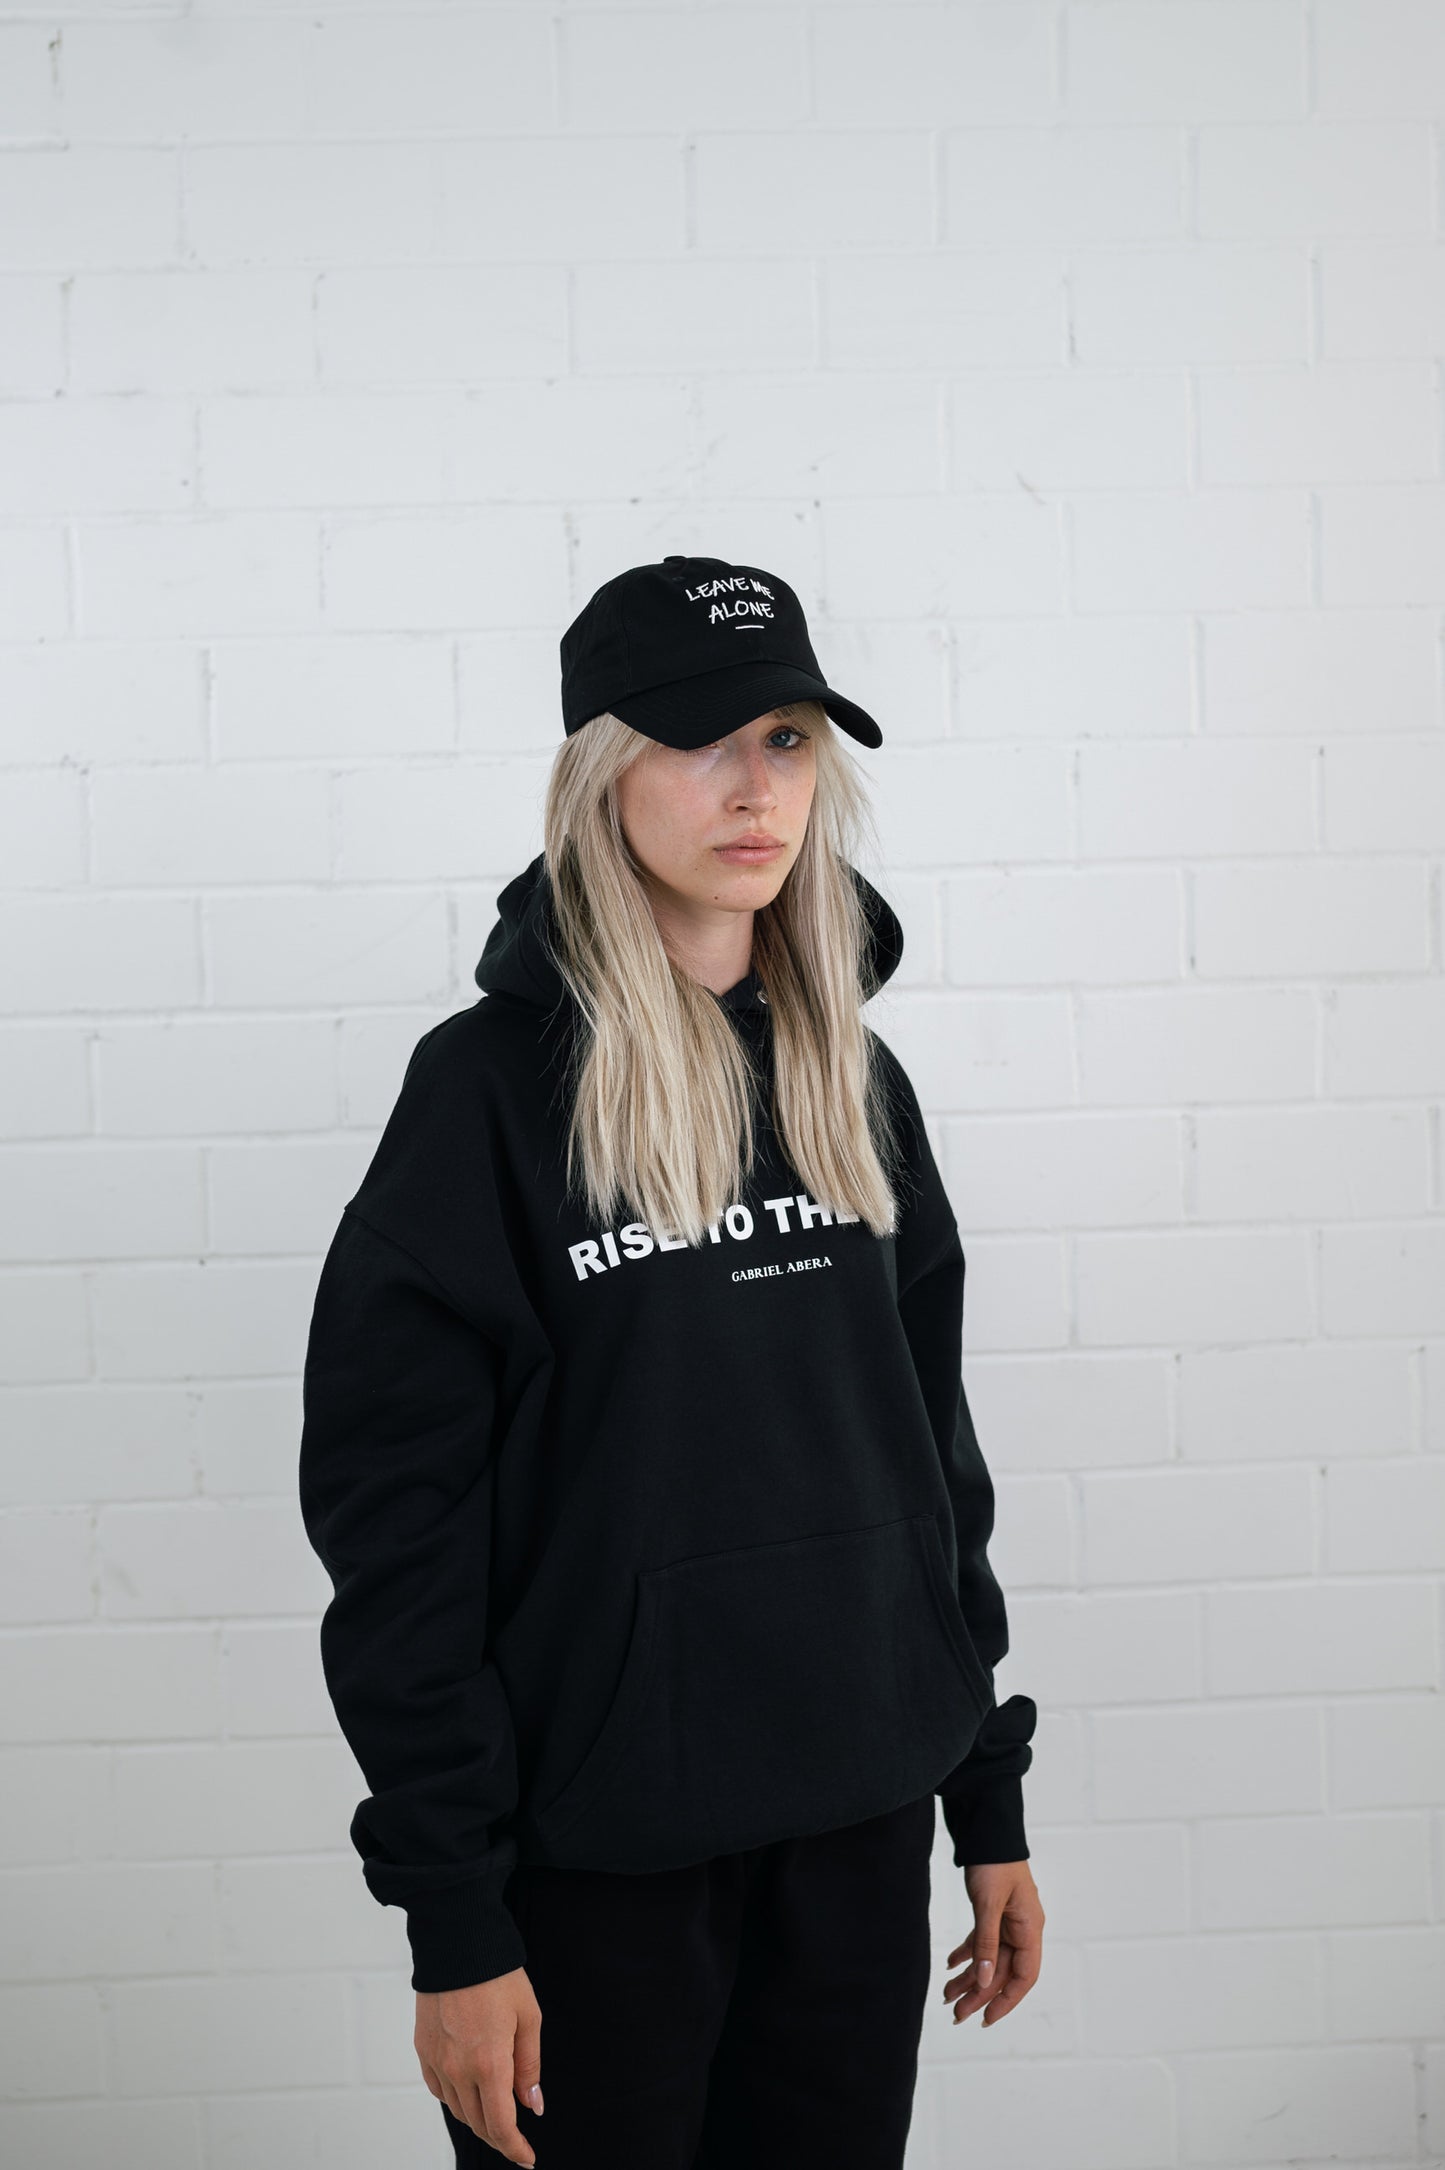 Female model wearing a Black cap with white leave me alone embroidery in the front